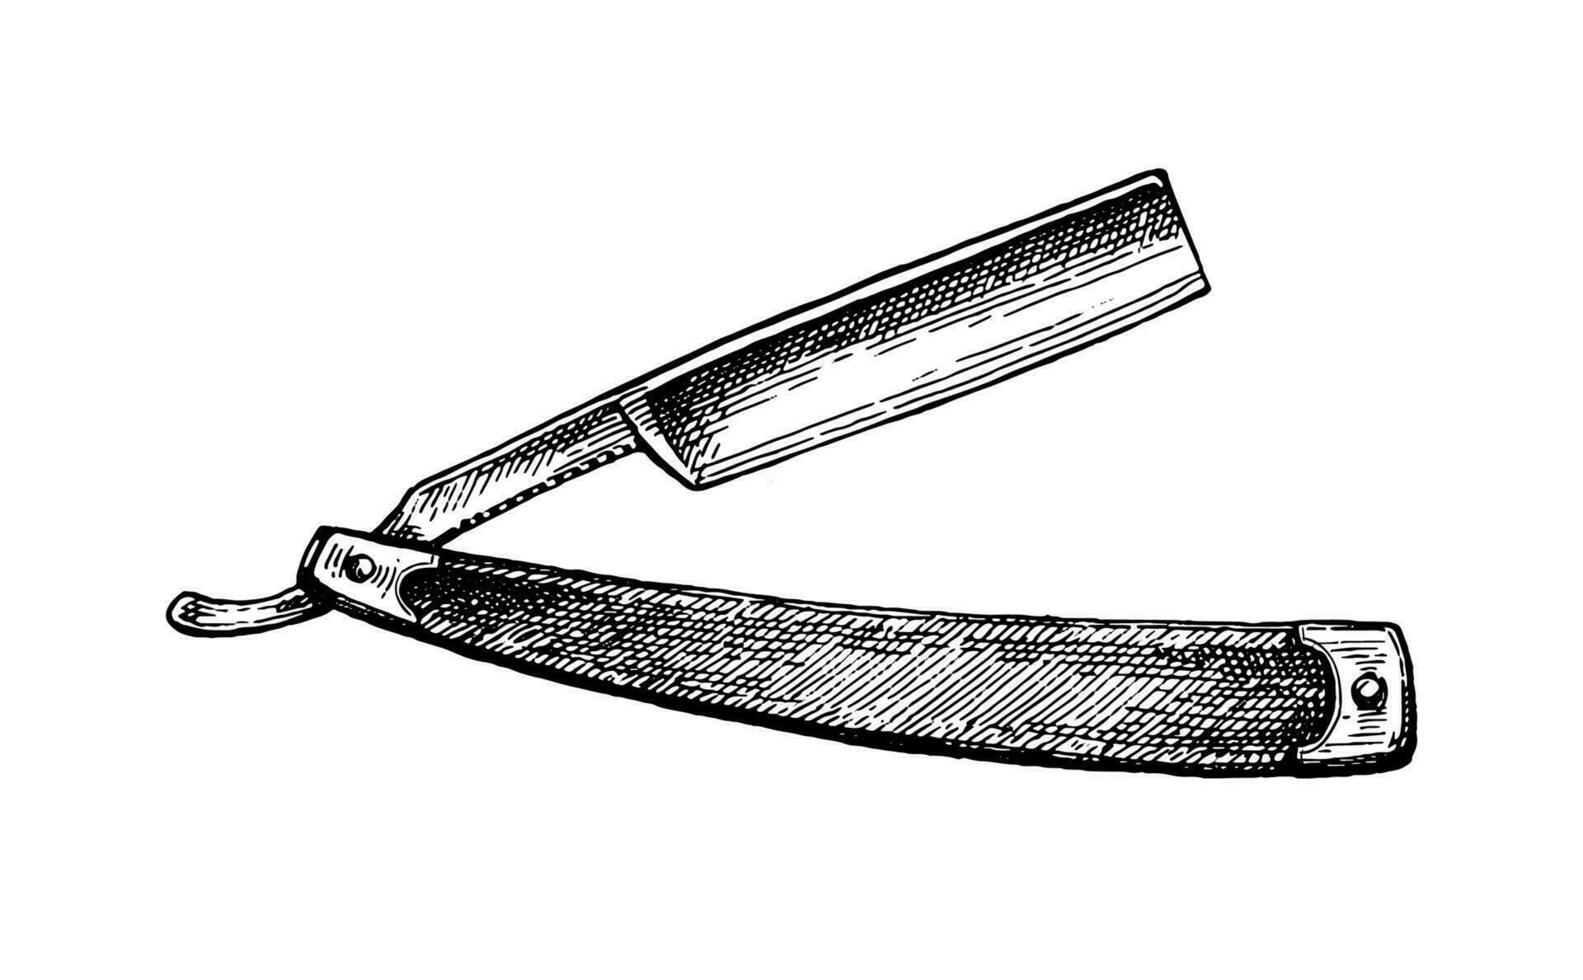 Folding straight razor. Ink sketch isolated on white background. Hand drawn vector illustration. Vintage style stroke drawing.